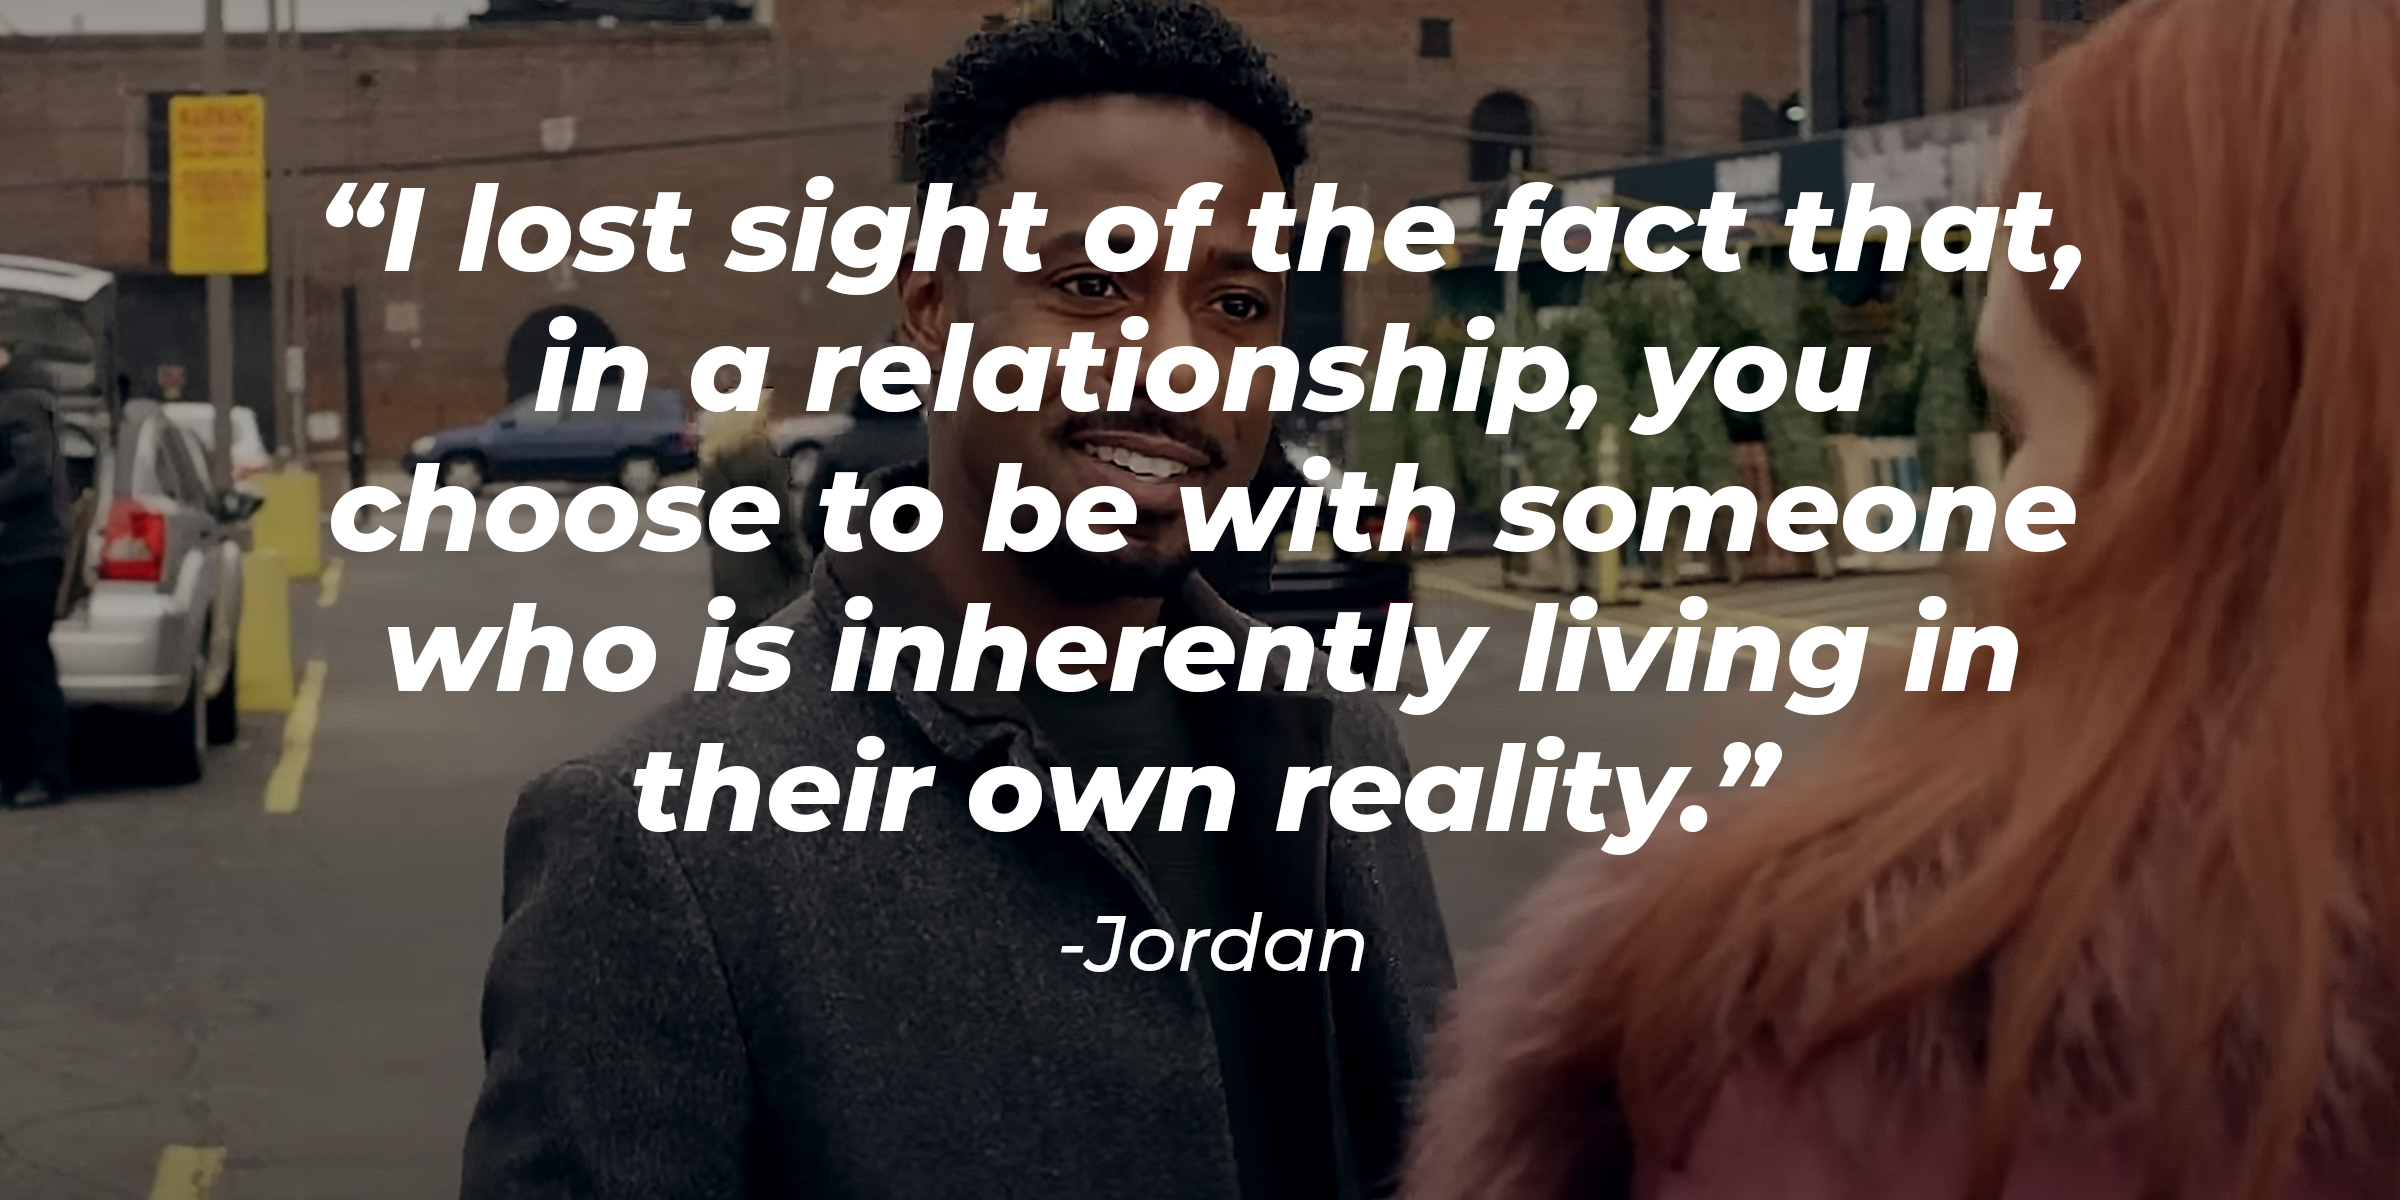 An image of the character Jeff from "Moder Love" with a quote by the character Jordan: “I lost sight of the fact that, in a relationship, you choose to be with someone who is inherently living in their own reality.” | Source: Youtube.com/PrimeVideoUK